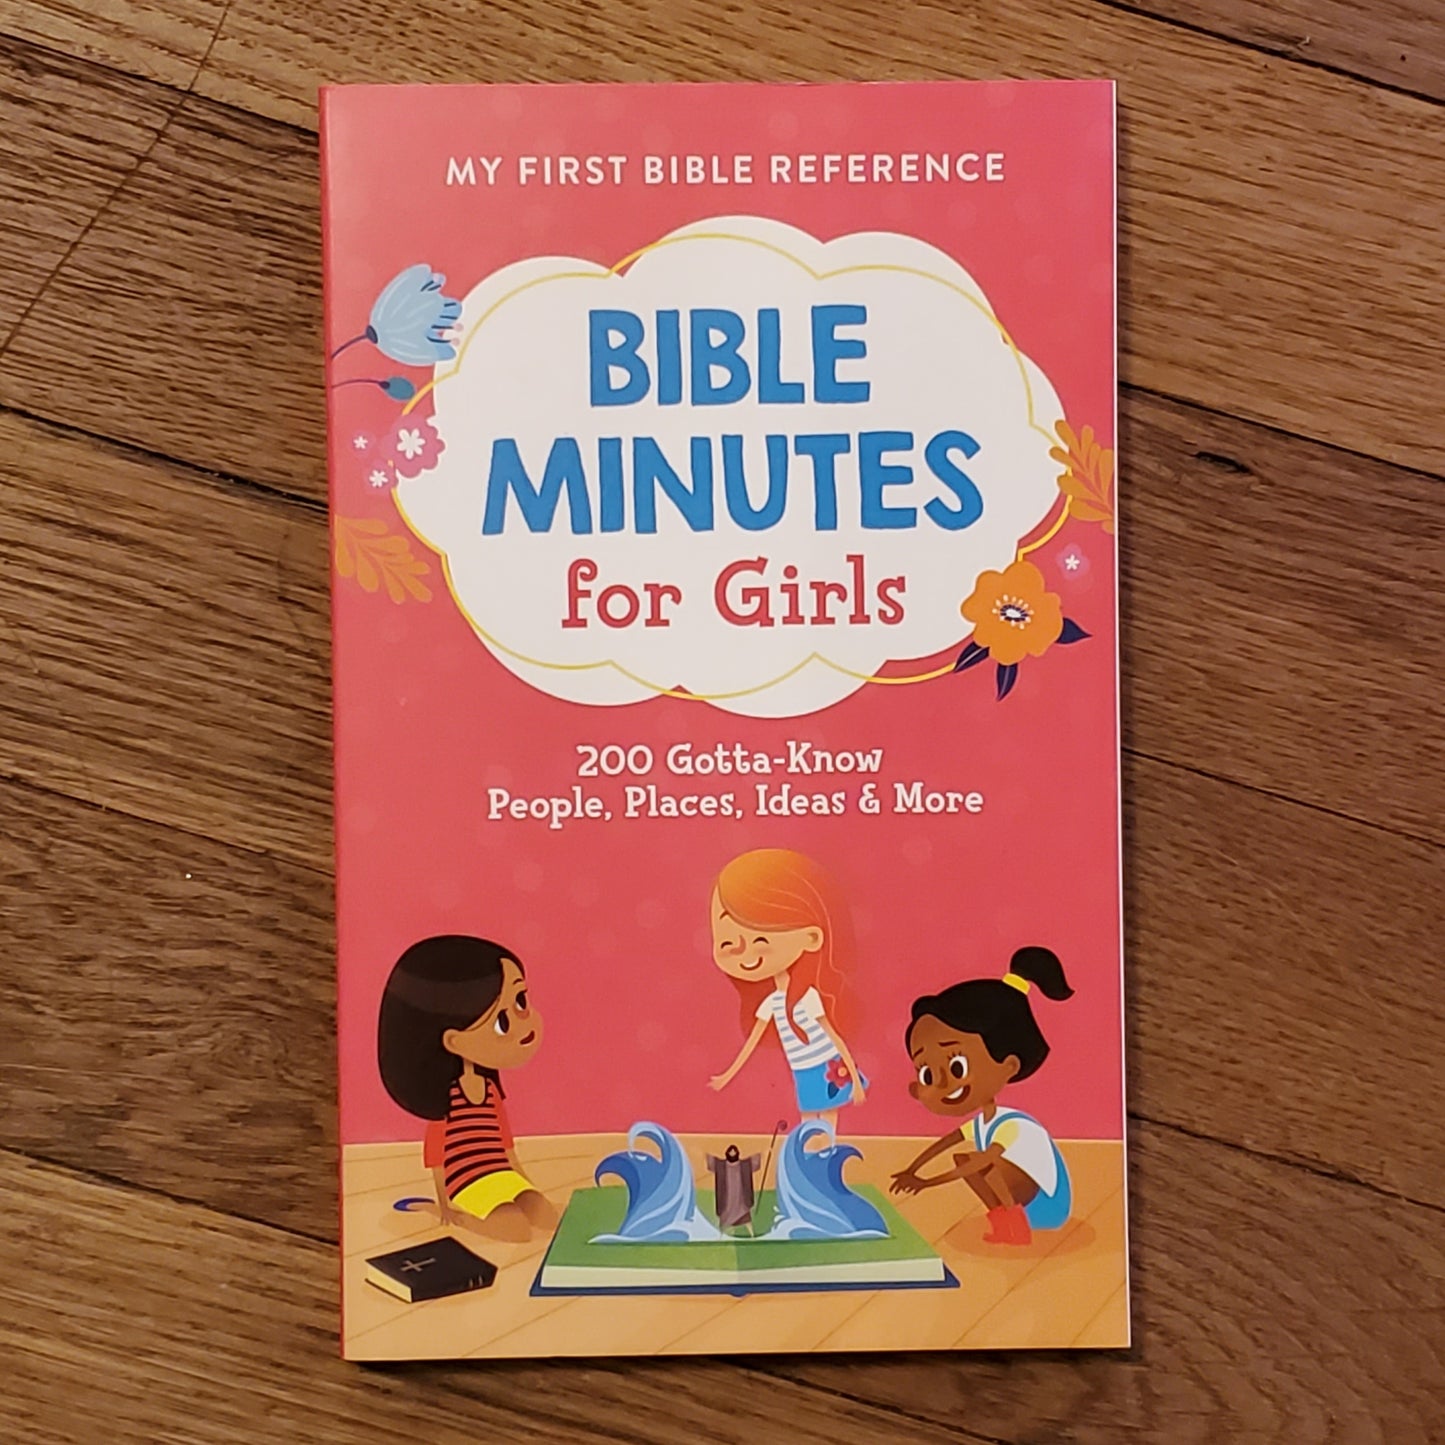 GB Bible Minutes for Girls (My First Bible Reference)